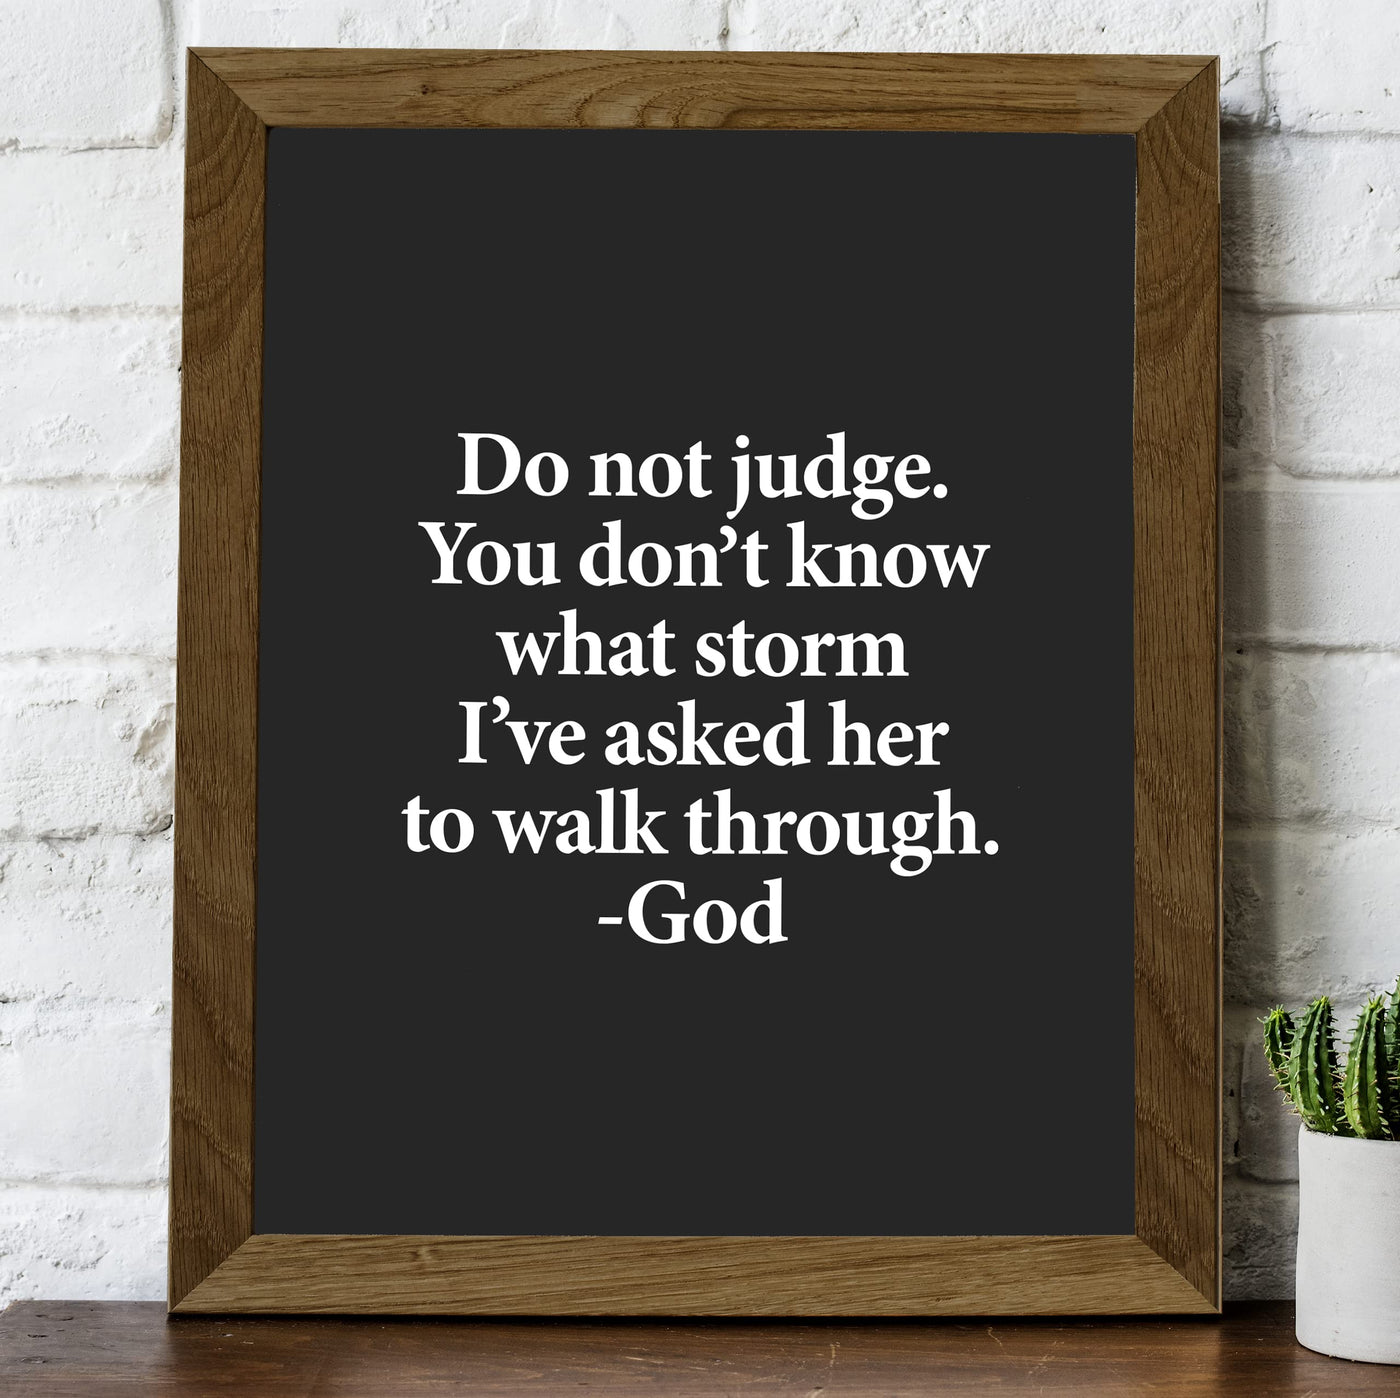 Don't Know What Storms I've Asked Her to Go Through -God Inspirational Quotes Wall Art -8x10" Typographic Christian Print -Ready to Frame. Motivational Home-Office-Church Decor. Reminder of Grace!